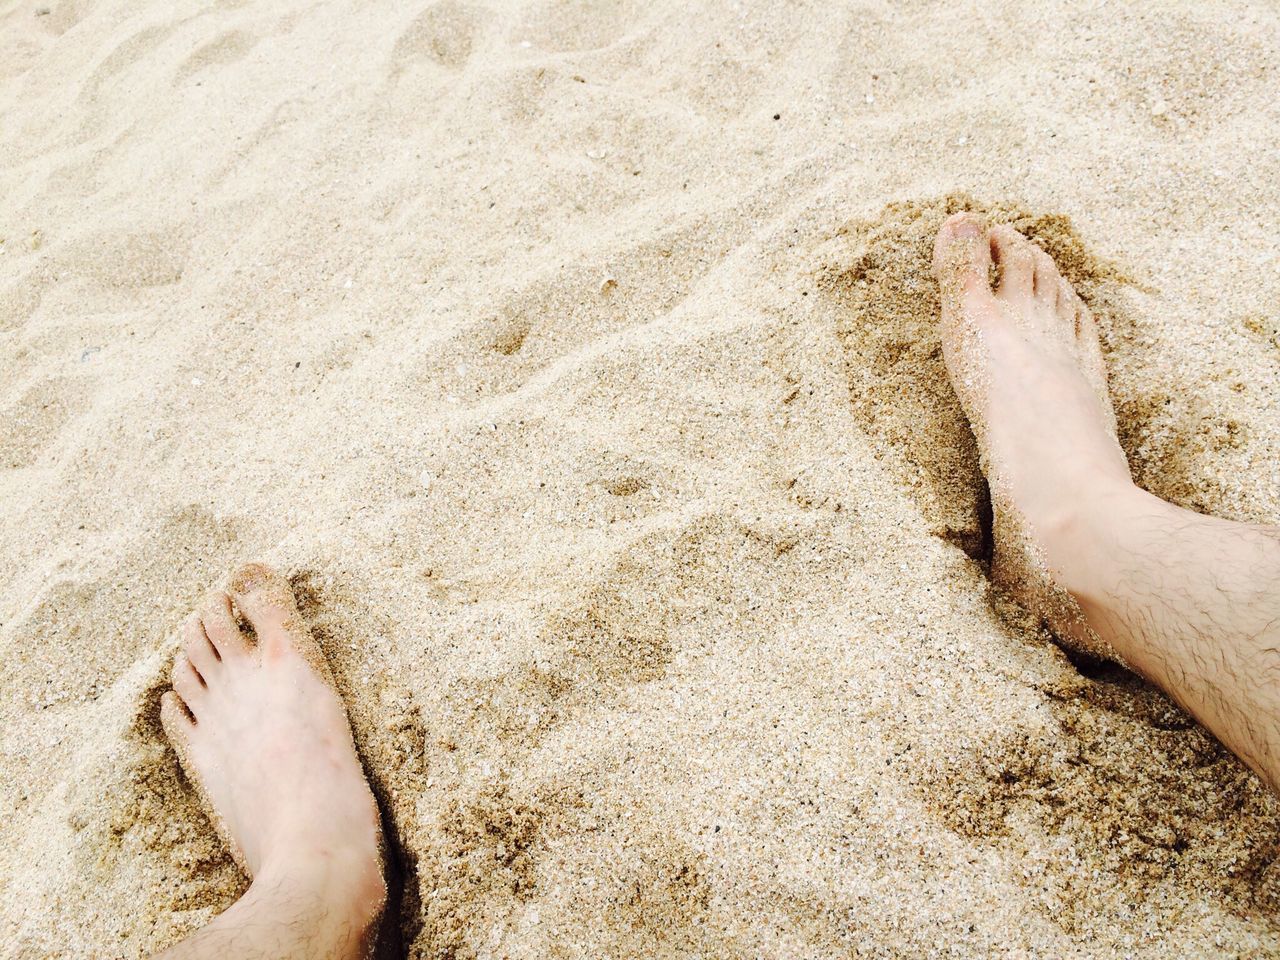 low section, person, sand, beach, barefoot, human foot, personal perspective, lifestyles, leisure activity, shore, high angle view, relaxation, water, sunlight, sea, vacations